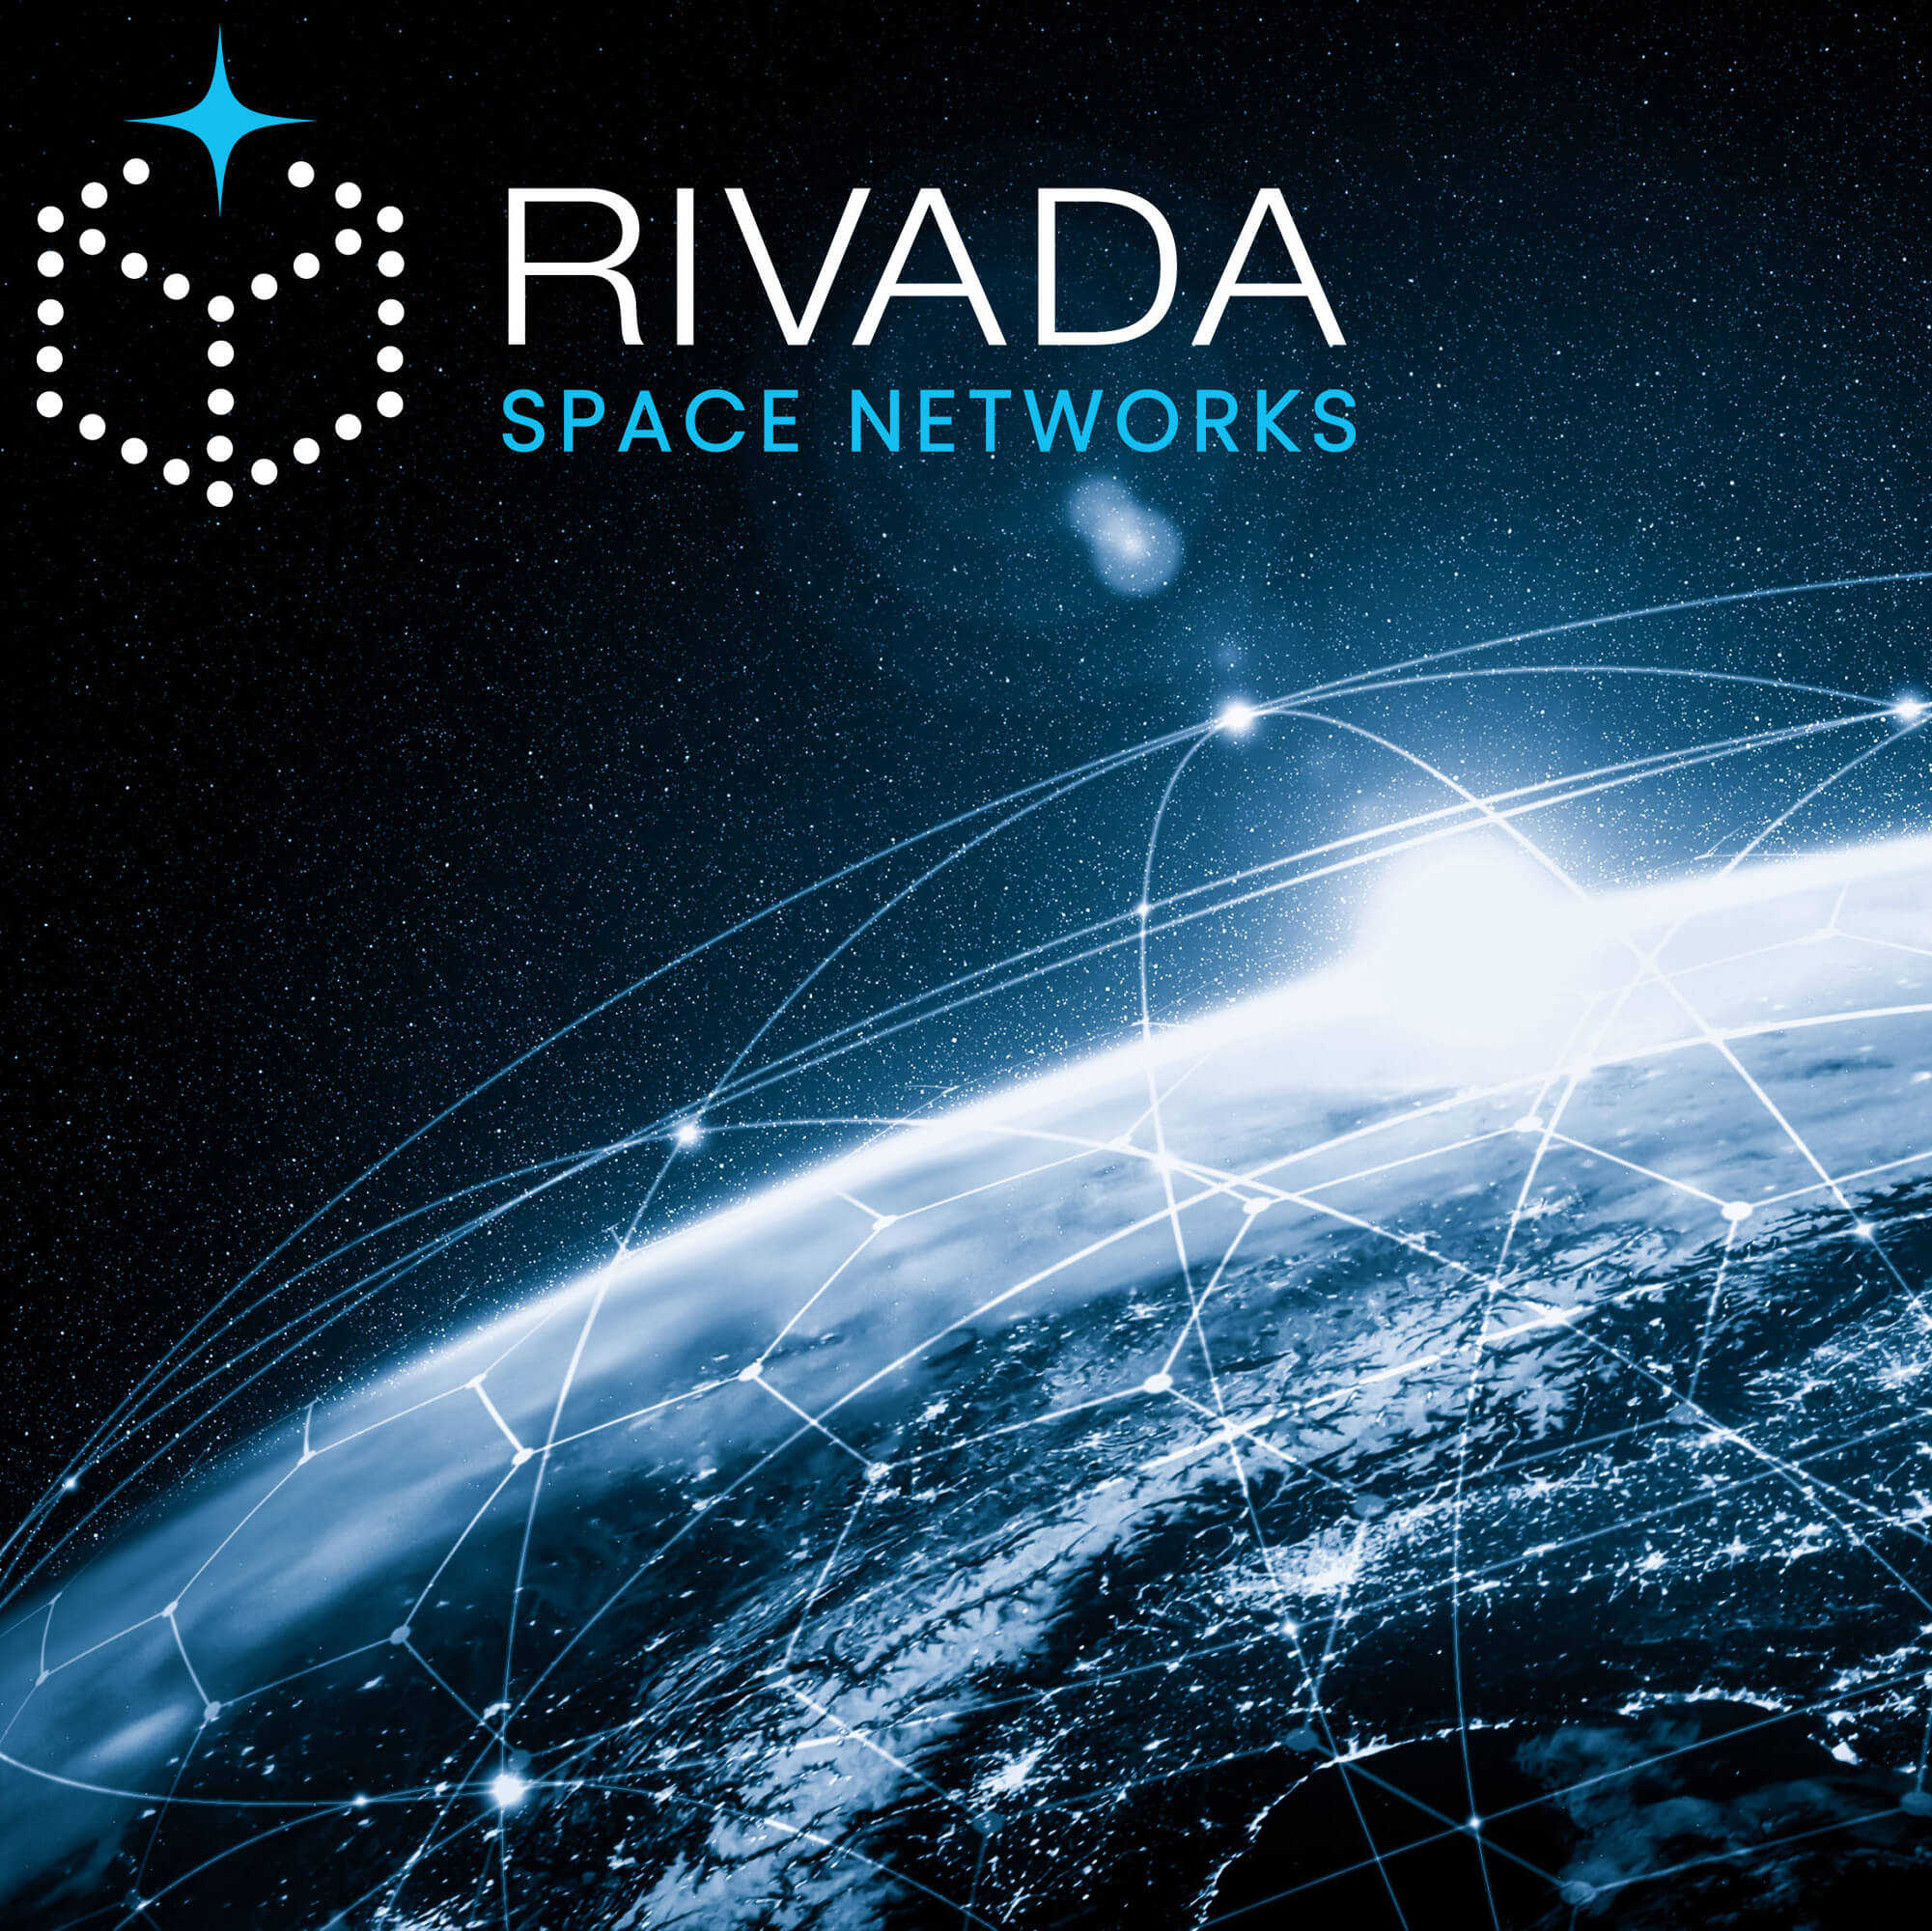 Terran Orbital Wins $2.4 Billion Contract to Build 300 Satellites for Rivada Space Networks